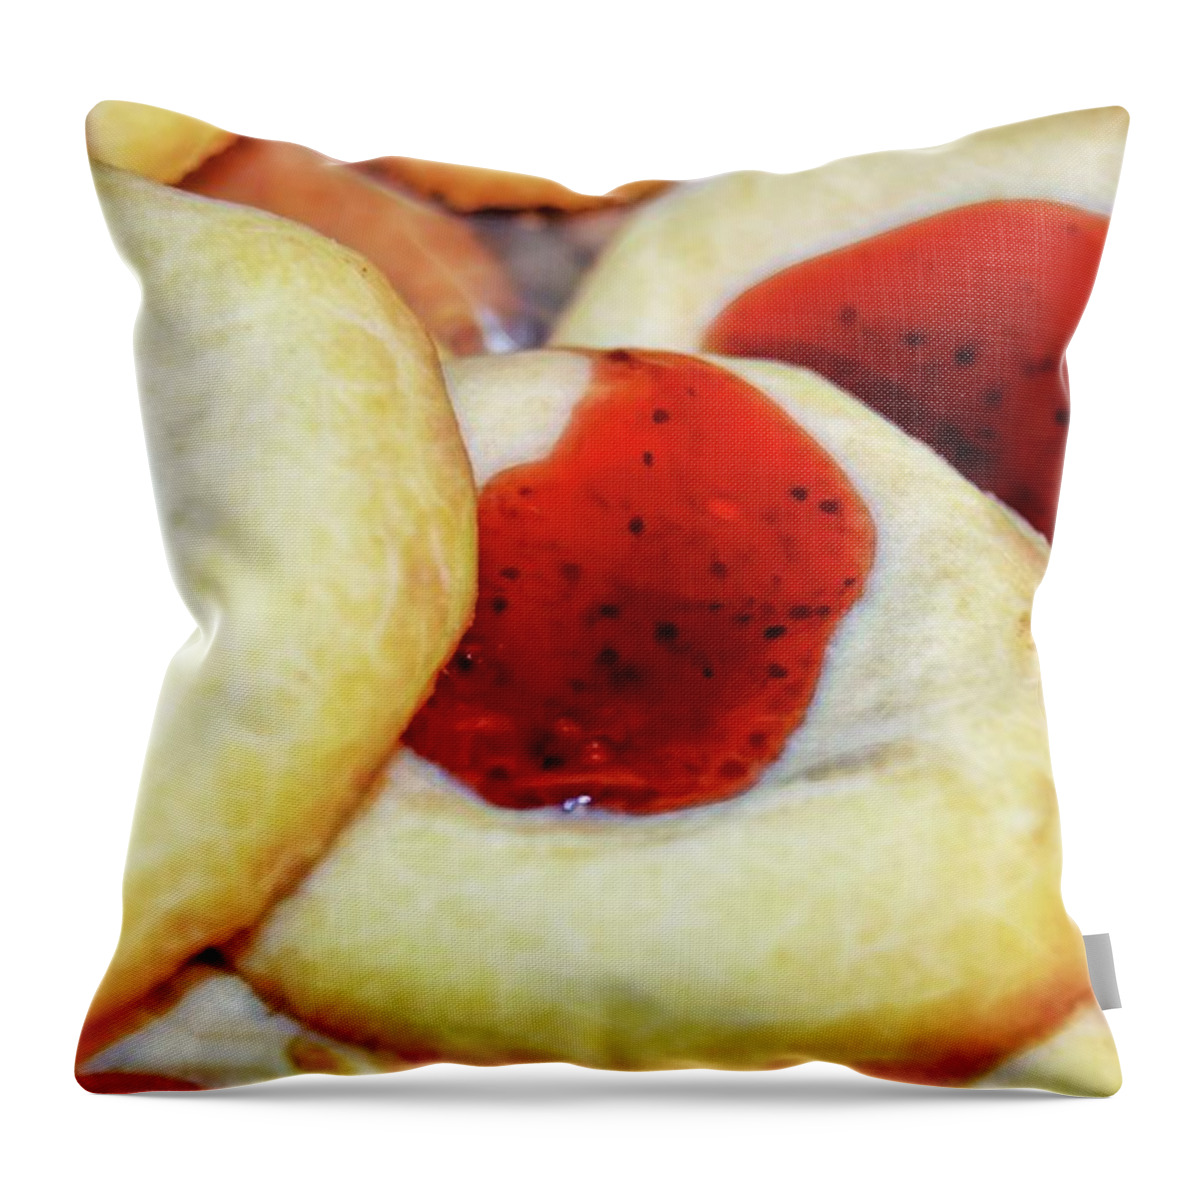 Cookies Throw Pillow featuring the photograph Cookies 3 by Kristalin Davis